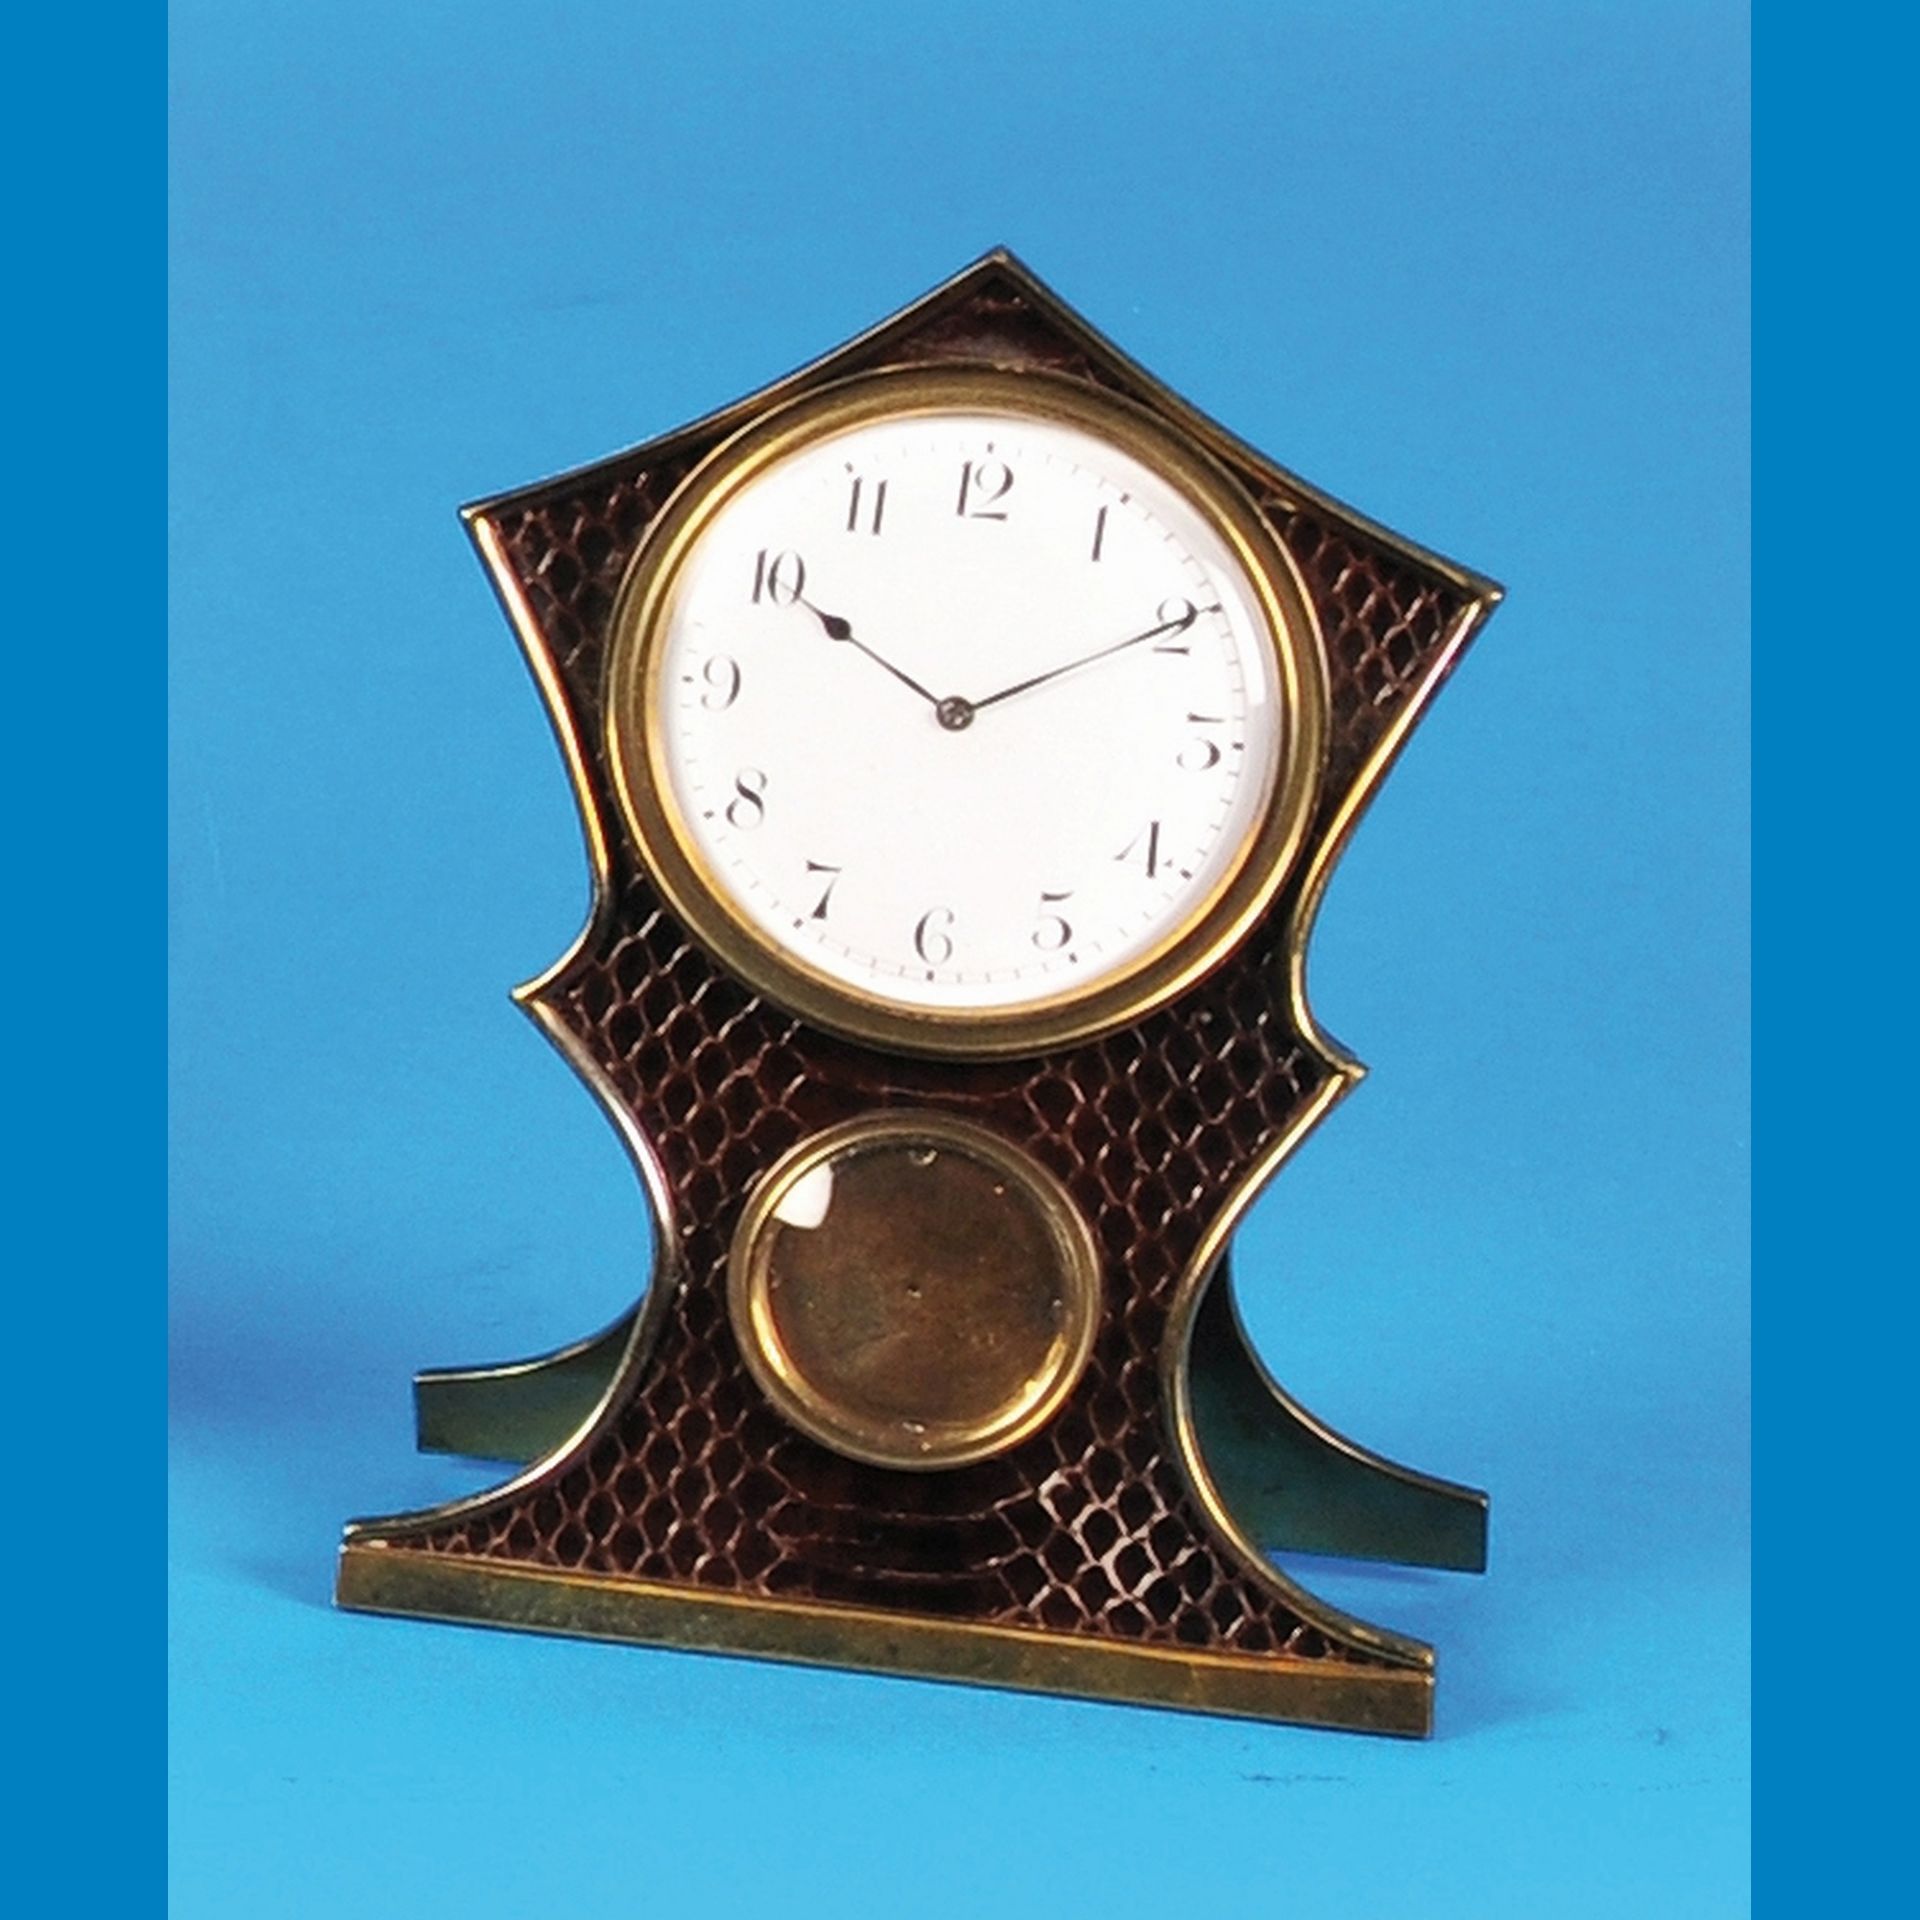 Small 8-days table clock with pocket watch movement and 2 spring houses and mounting brackets